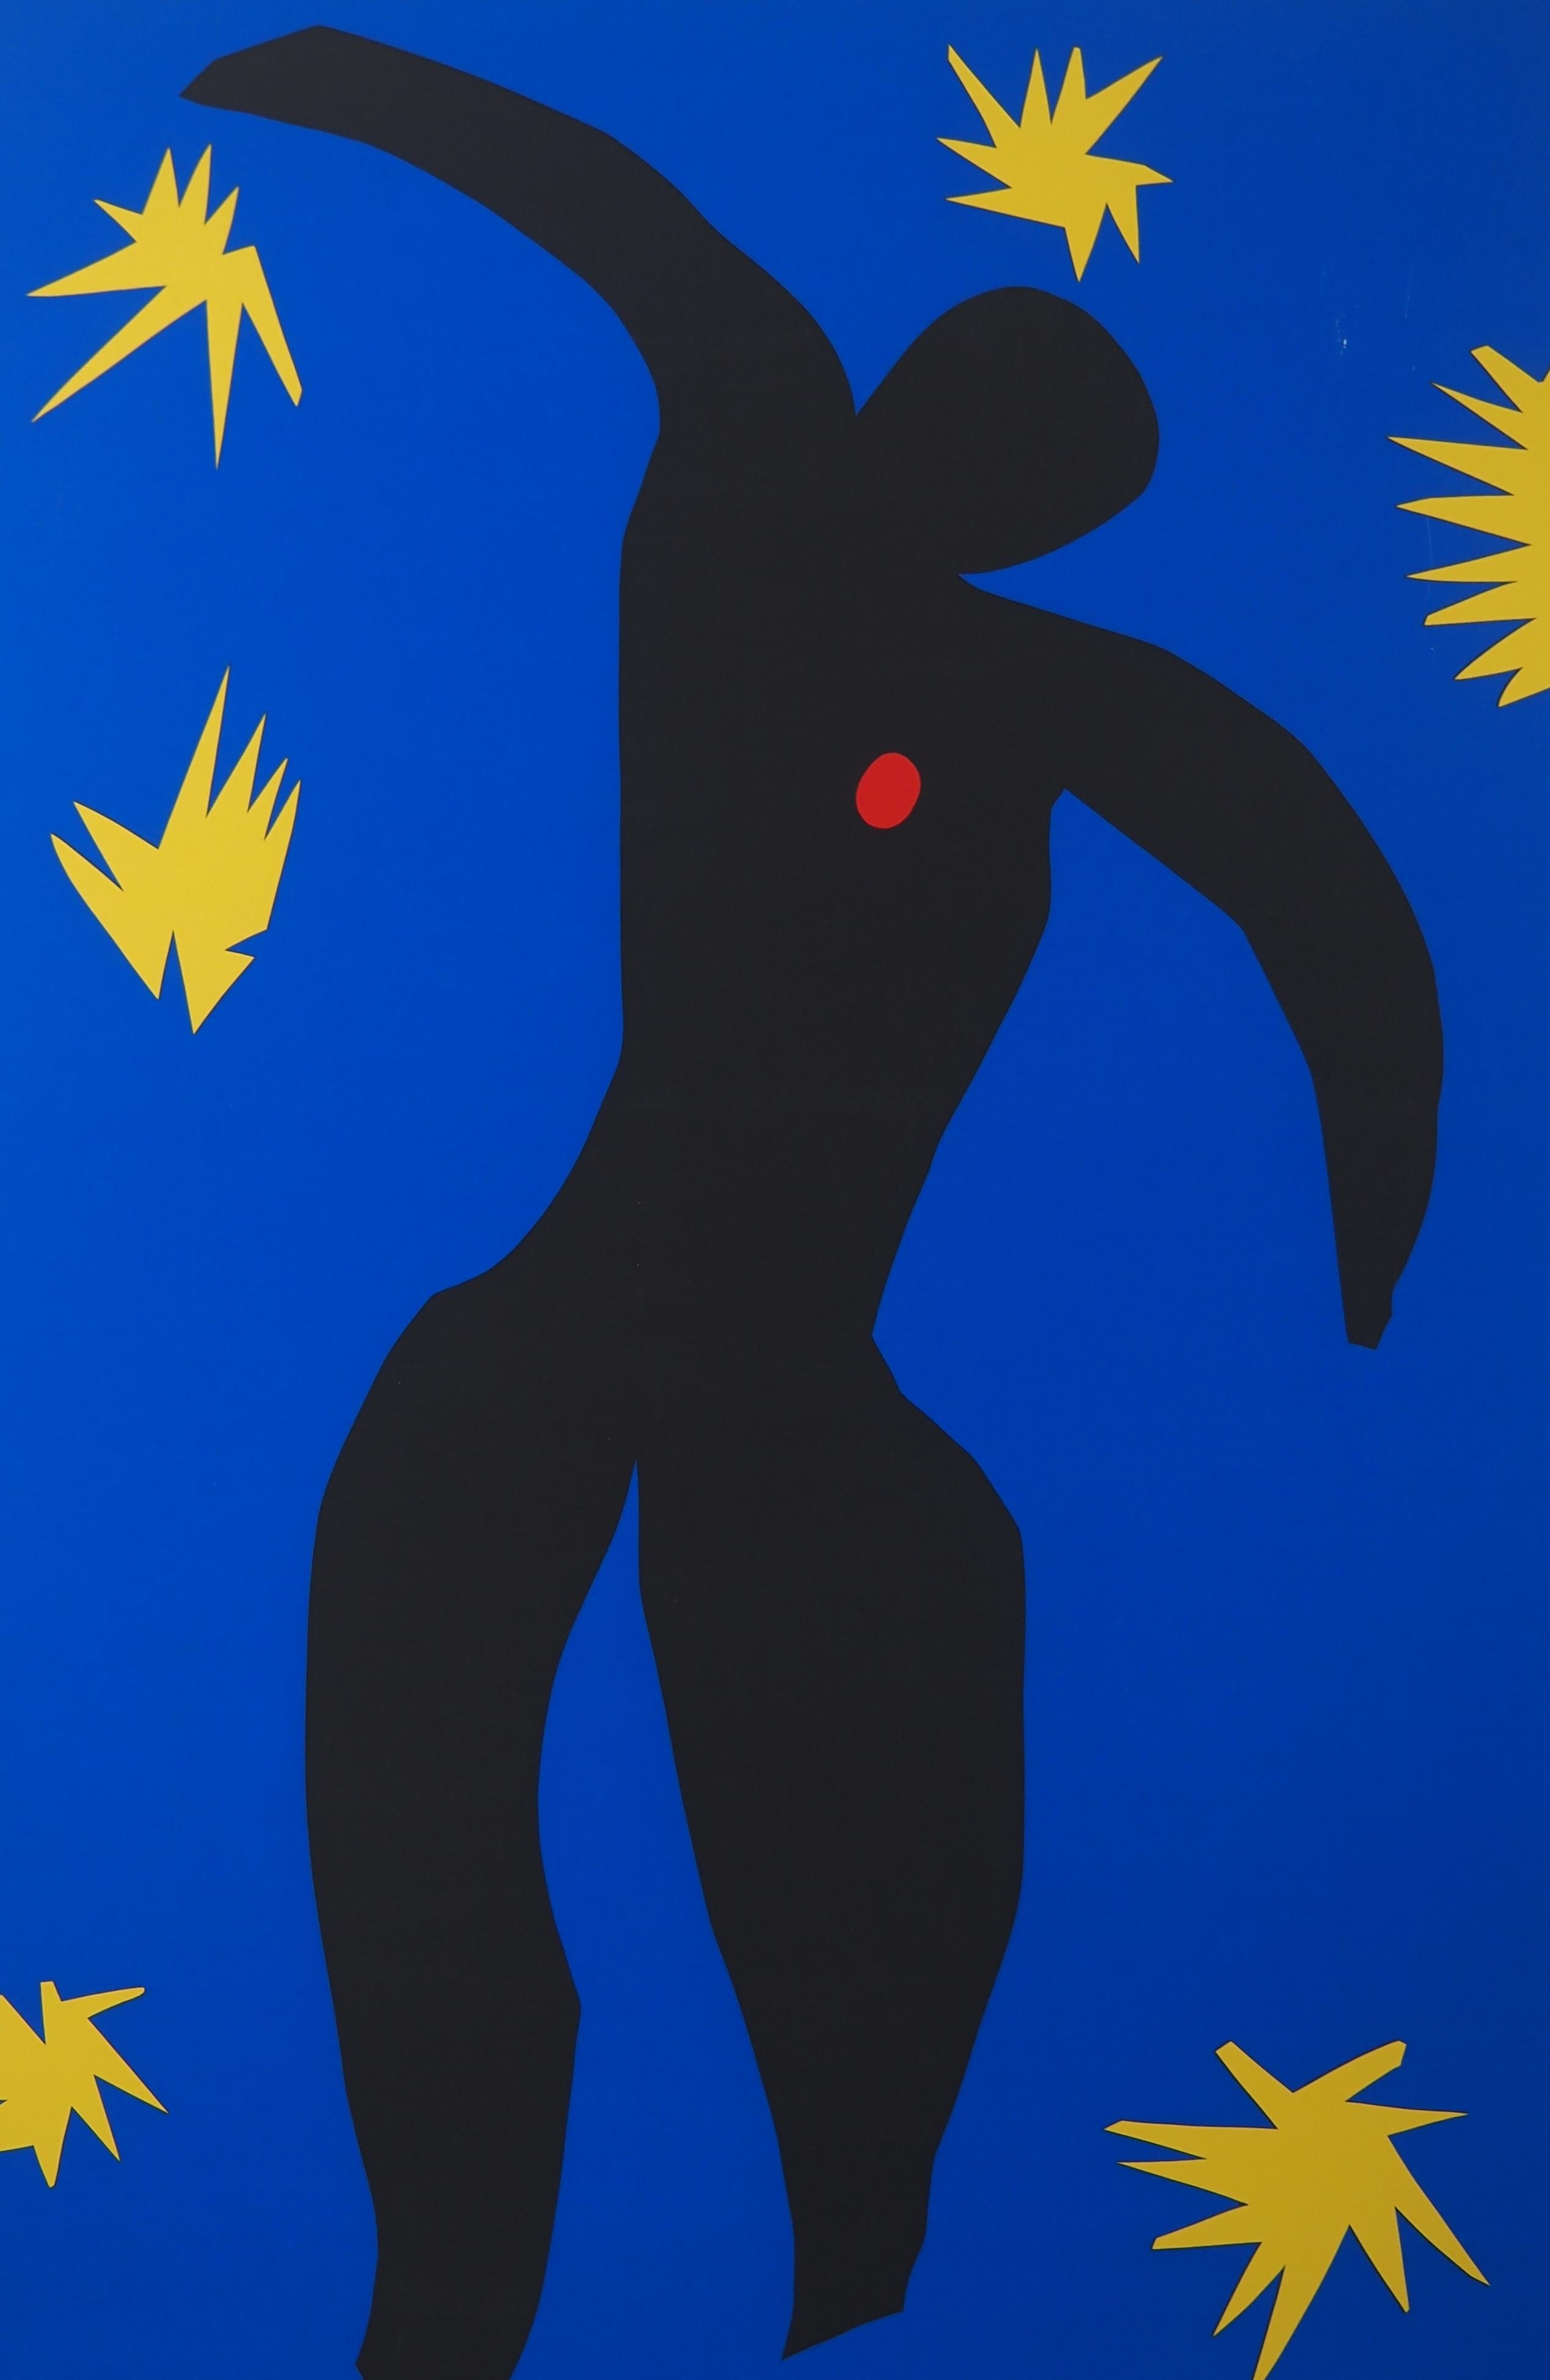 Henri Matisse (1869-1954) (after)
Icarus

Screen print
On heavy paper 99 x 70 cm (c. 40 x 28 in)

Excellent condition